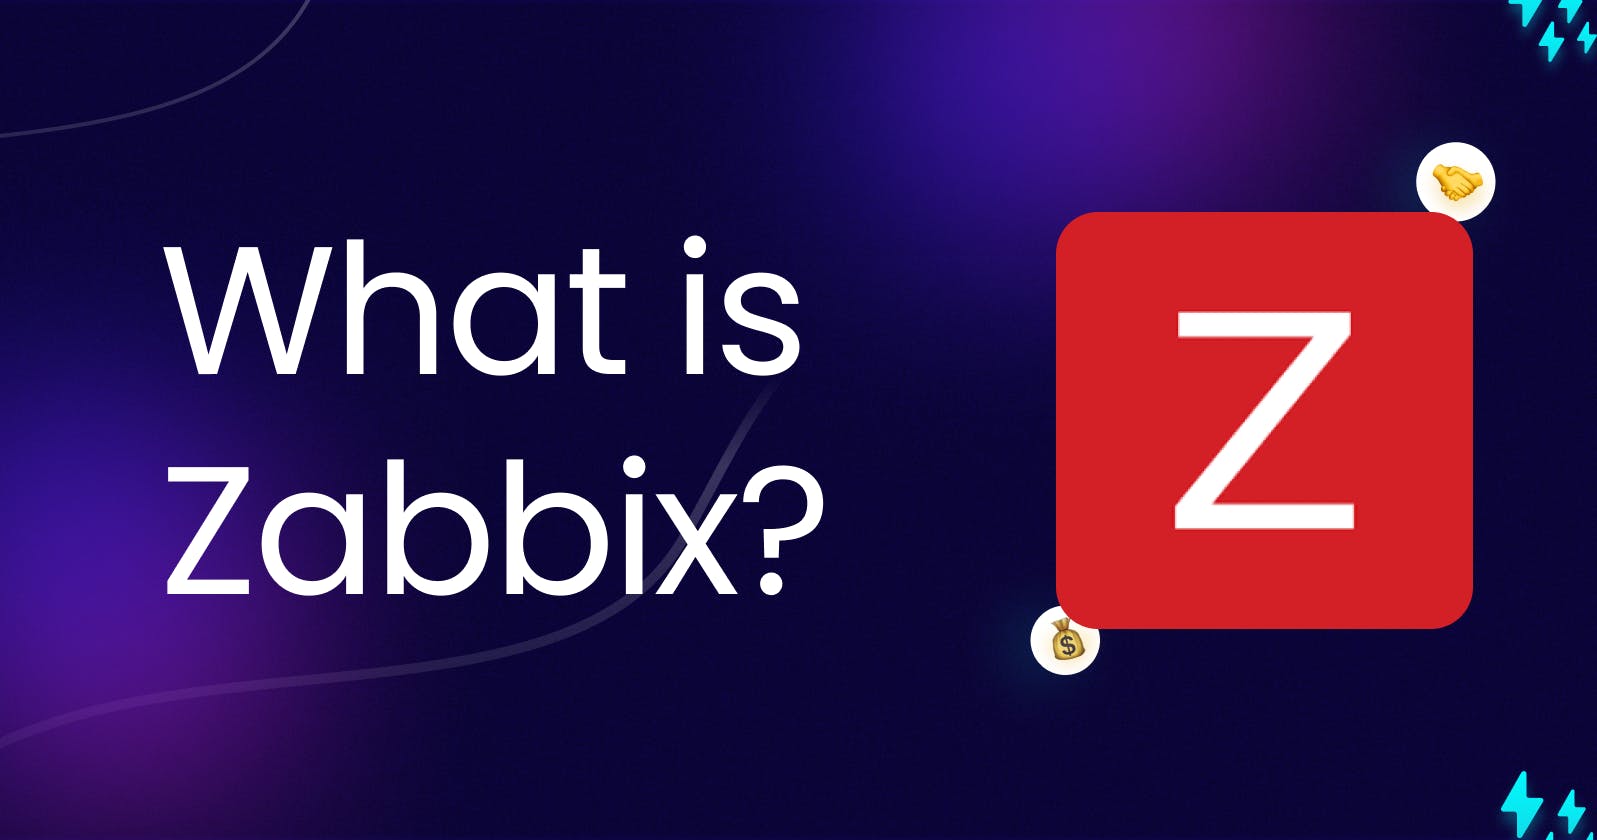 Zabbix: Monitoring and Managing IT Infrastructure with Efficiency and Precision